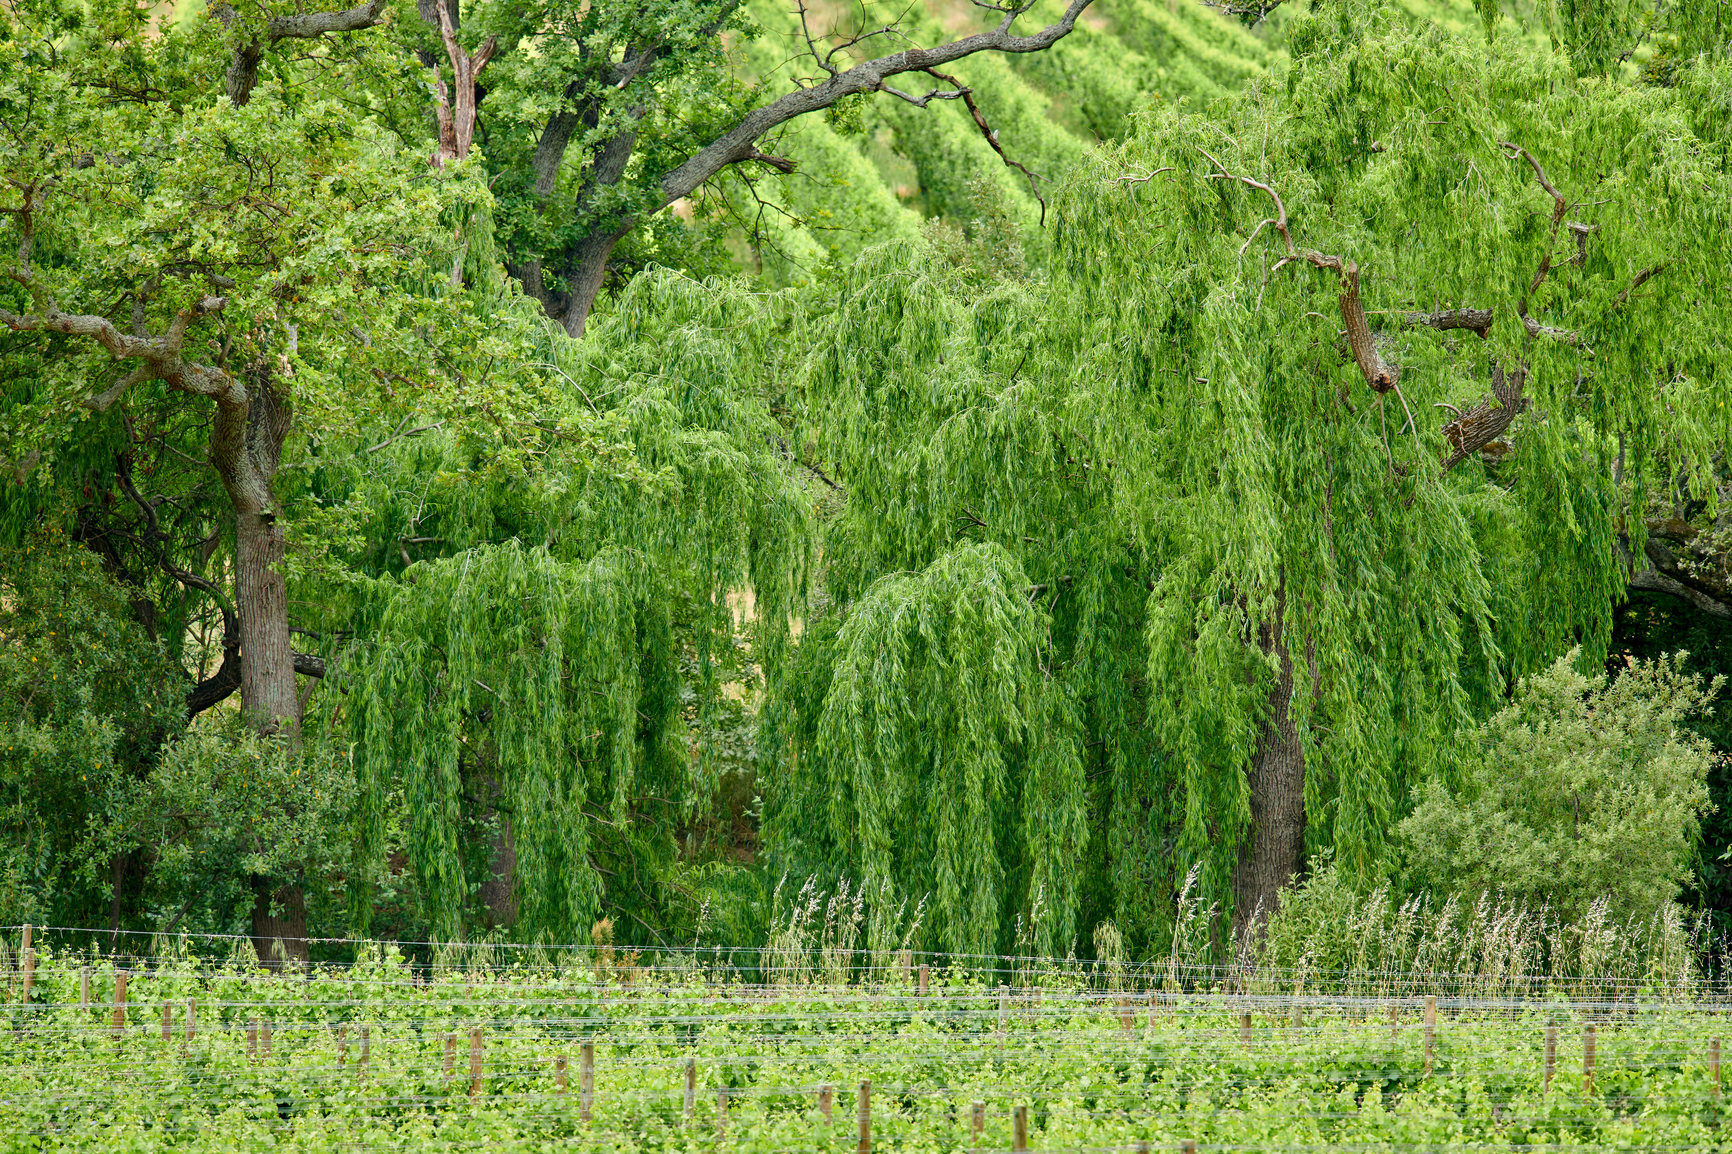 Buy stock photo Landscape view of vineyard of green grapes growing on wine agriculture and farming estate in remote countryside with weeping willow trees in background. Cultivation of fruit crops for export industry